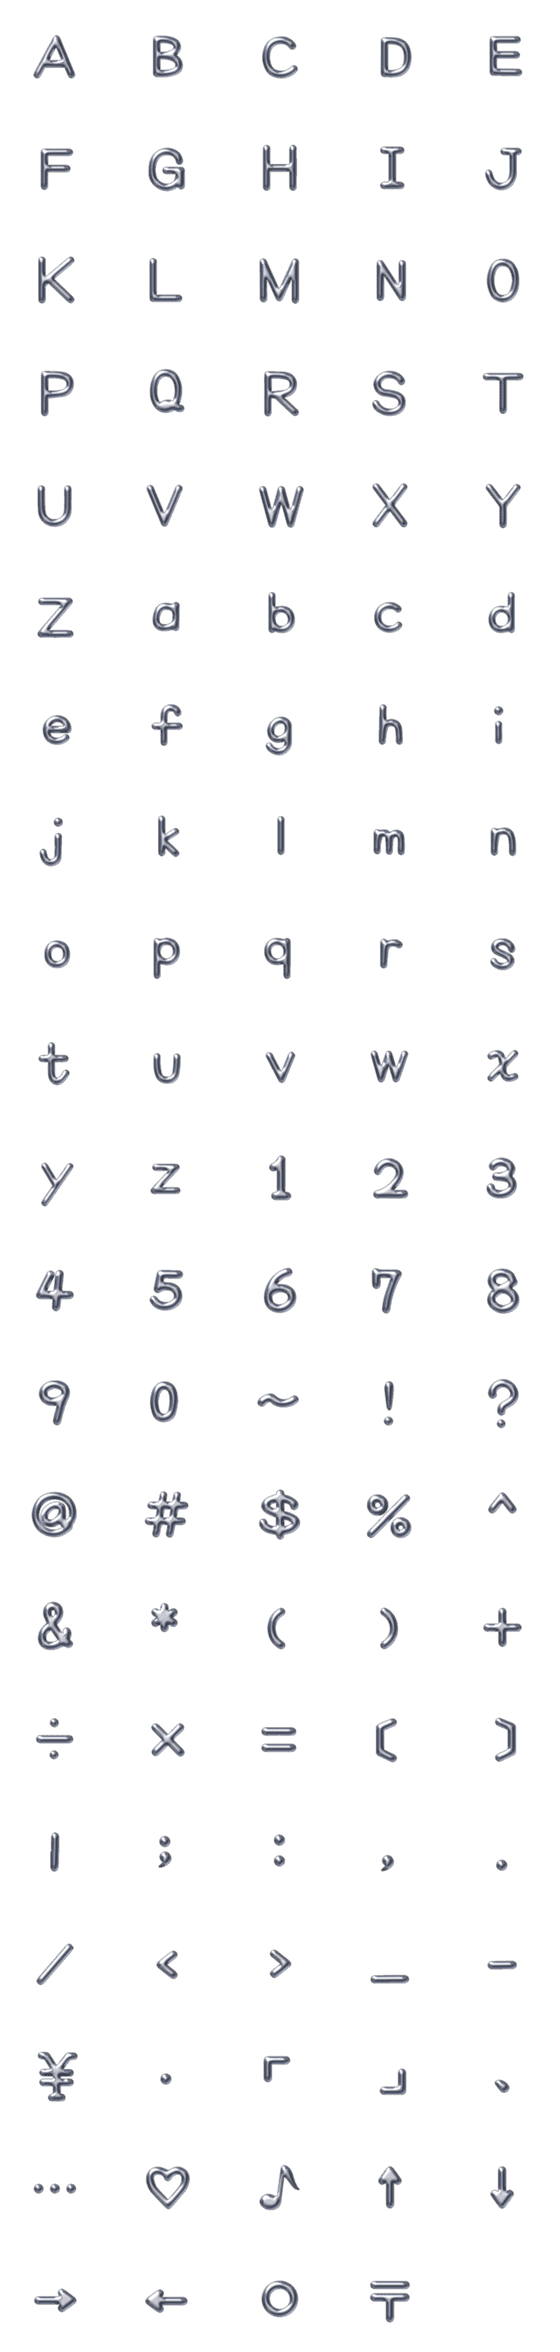 [LINE絵文字]Steel wordの画像一覧